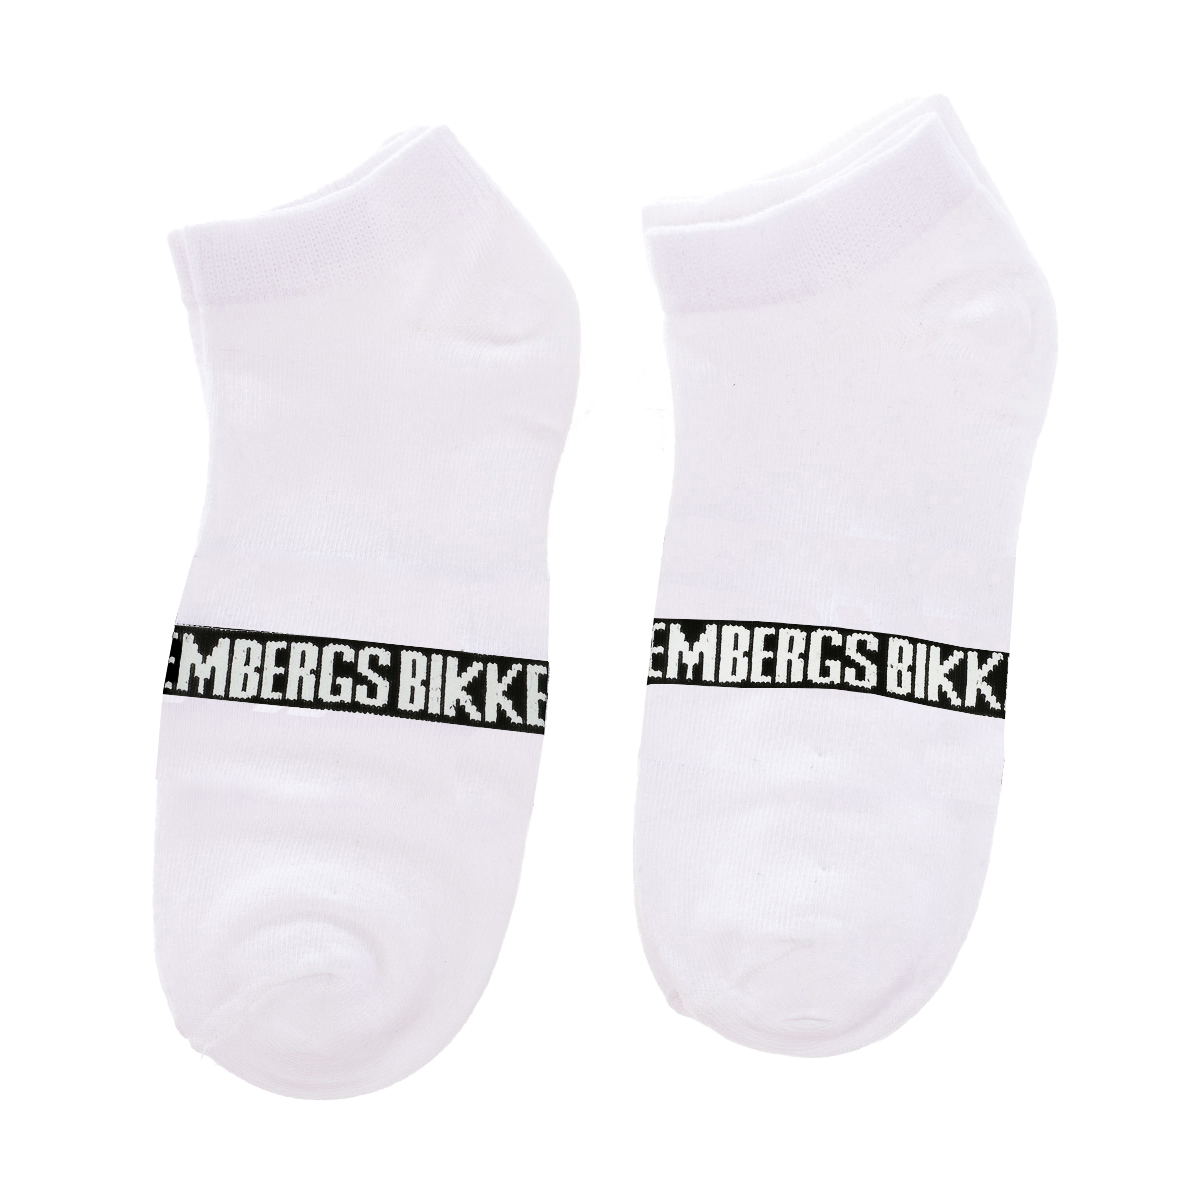 Pack 2 Calcetines Invisible Bk079 - blanco - 